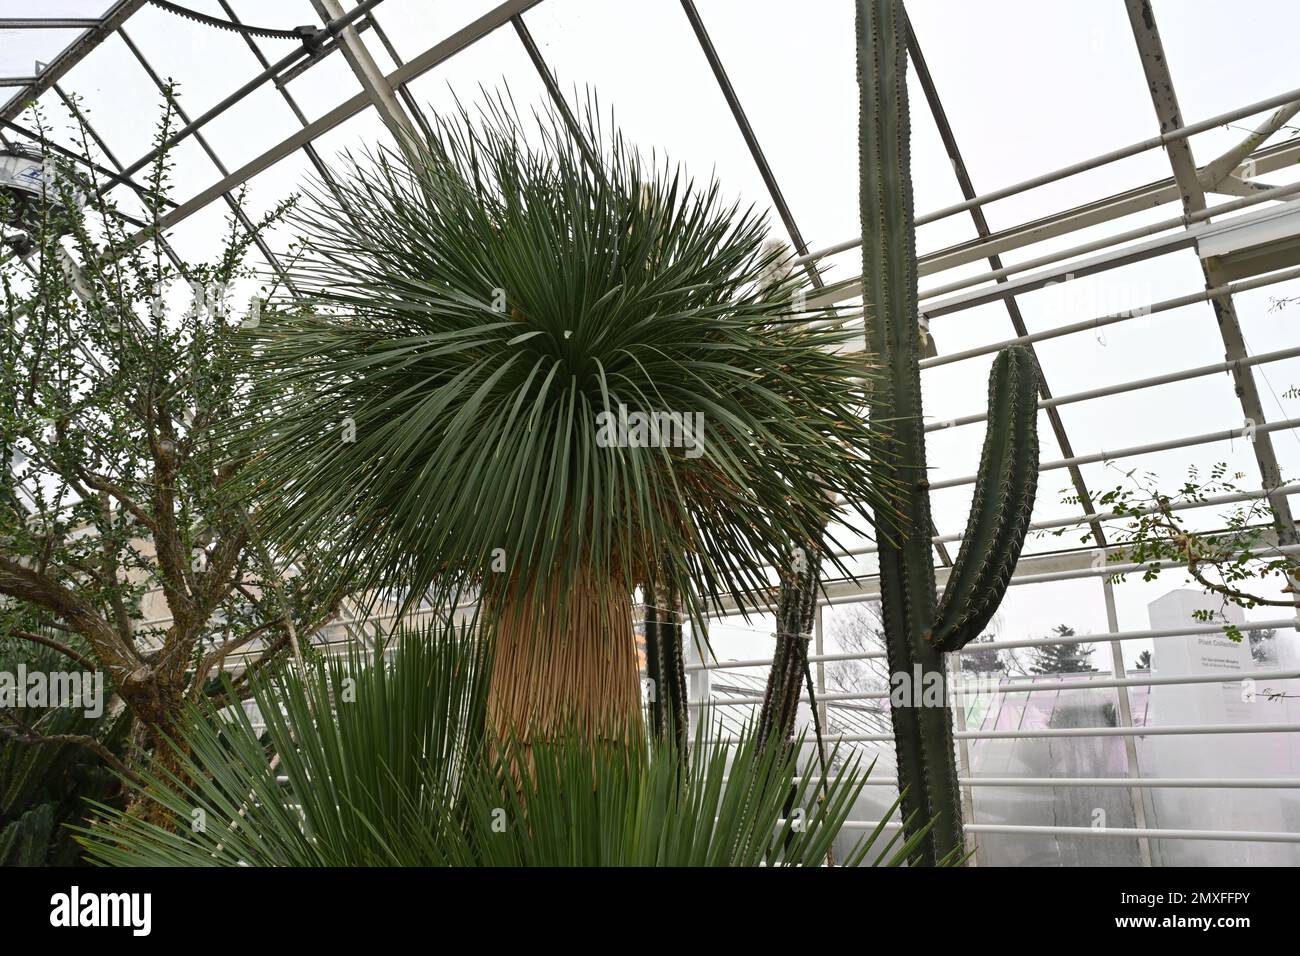 Yucca plant, in Latin called Yucca linearifolia, cultivated as a tree in a greenhouse among other exotic plants and cacti. Stock Photo